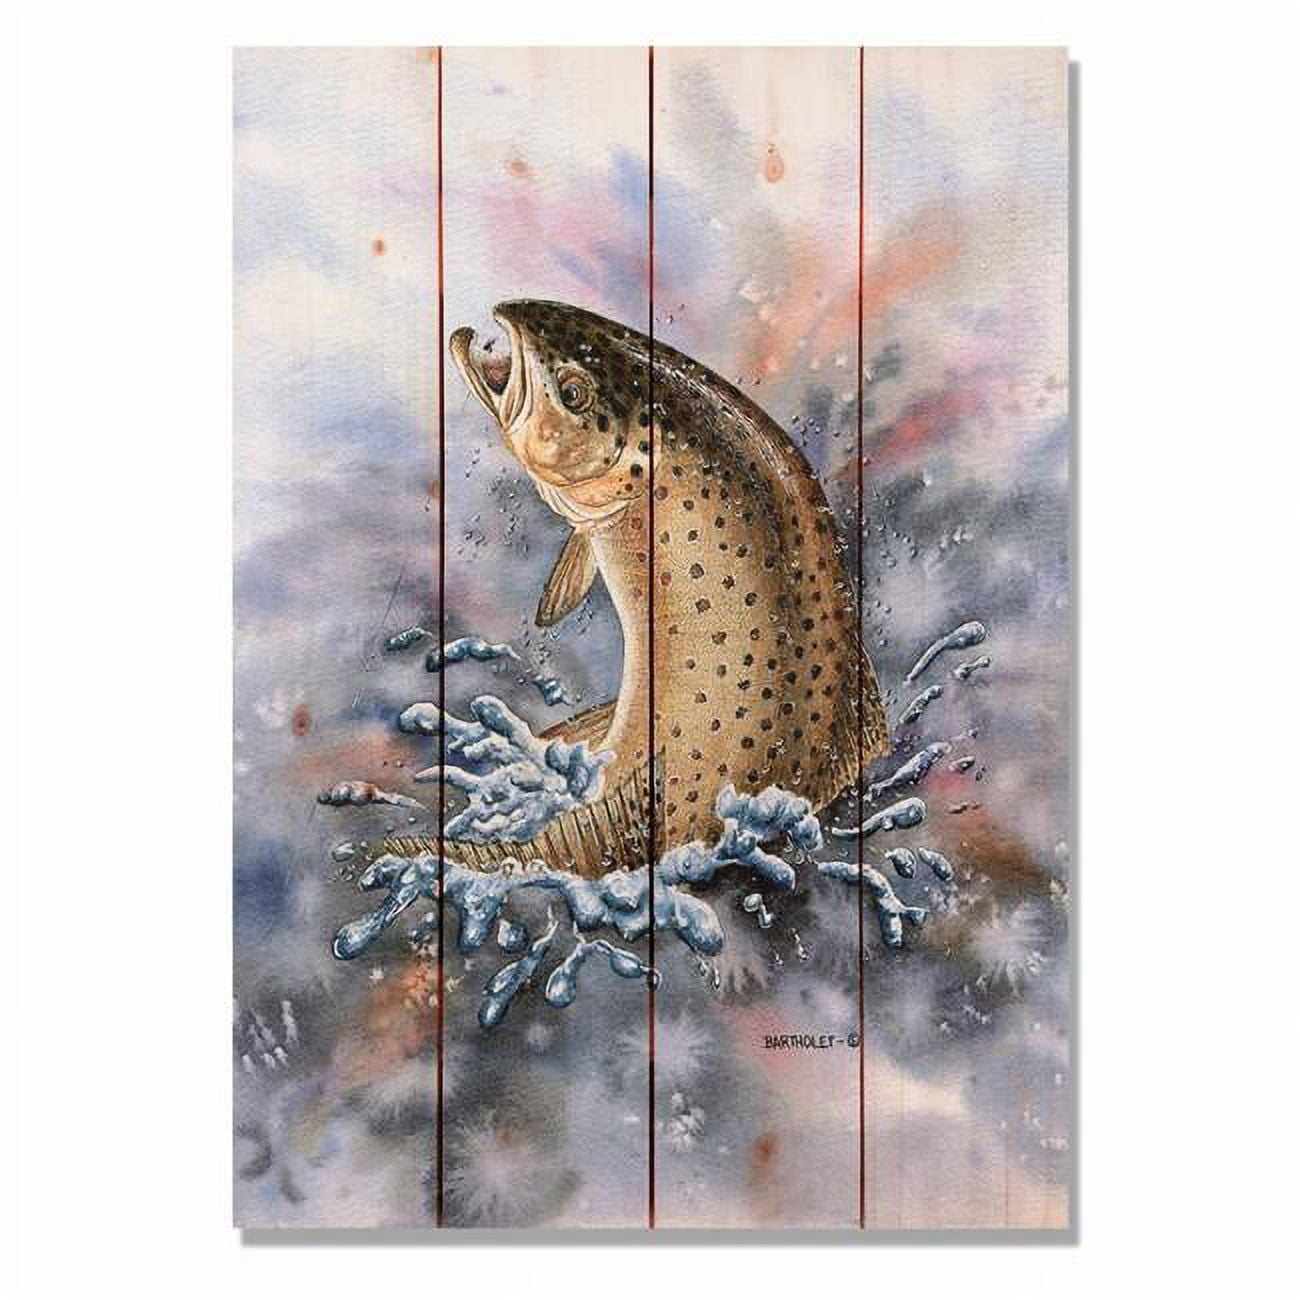 Day Dream Hq Dbfo1420 14 X 20 In. Bartholets Fish On - Brown Trout Wall Art